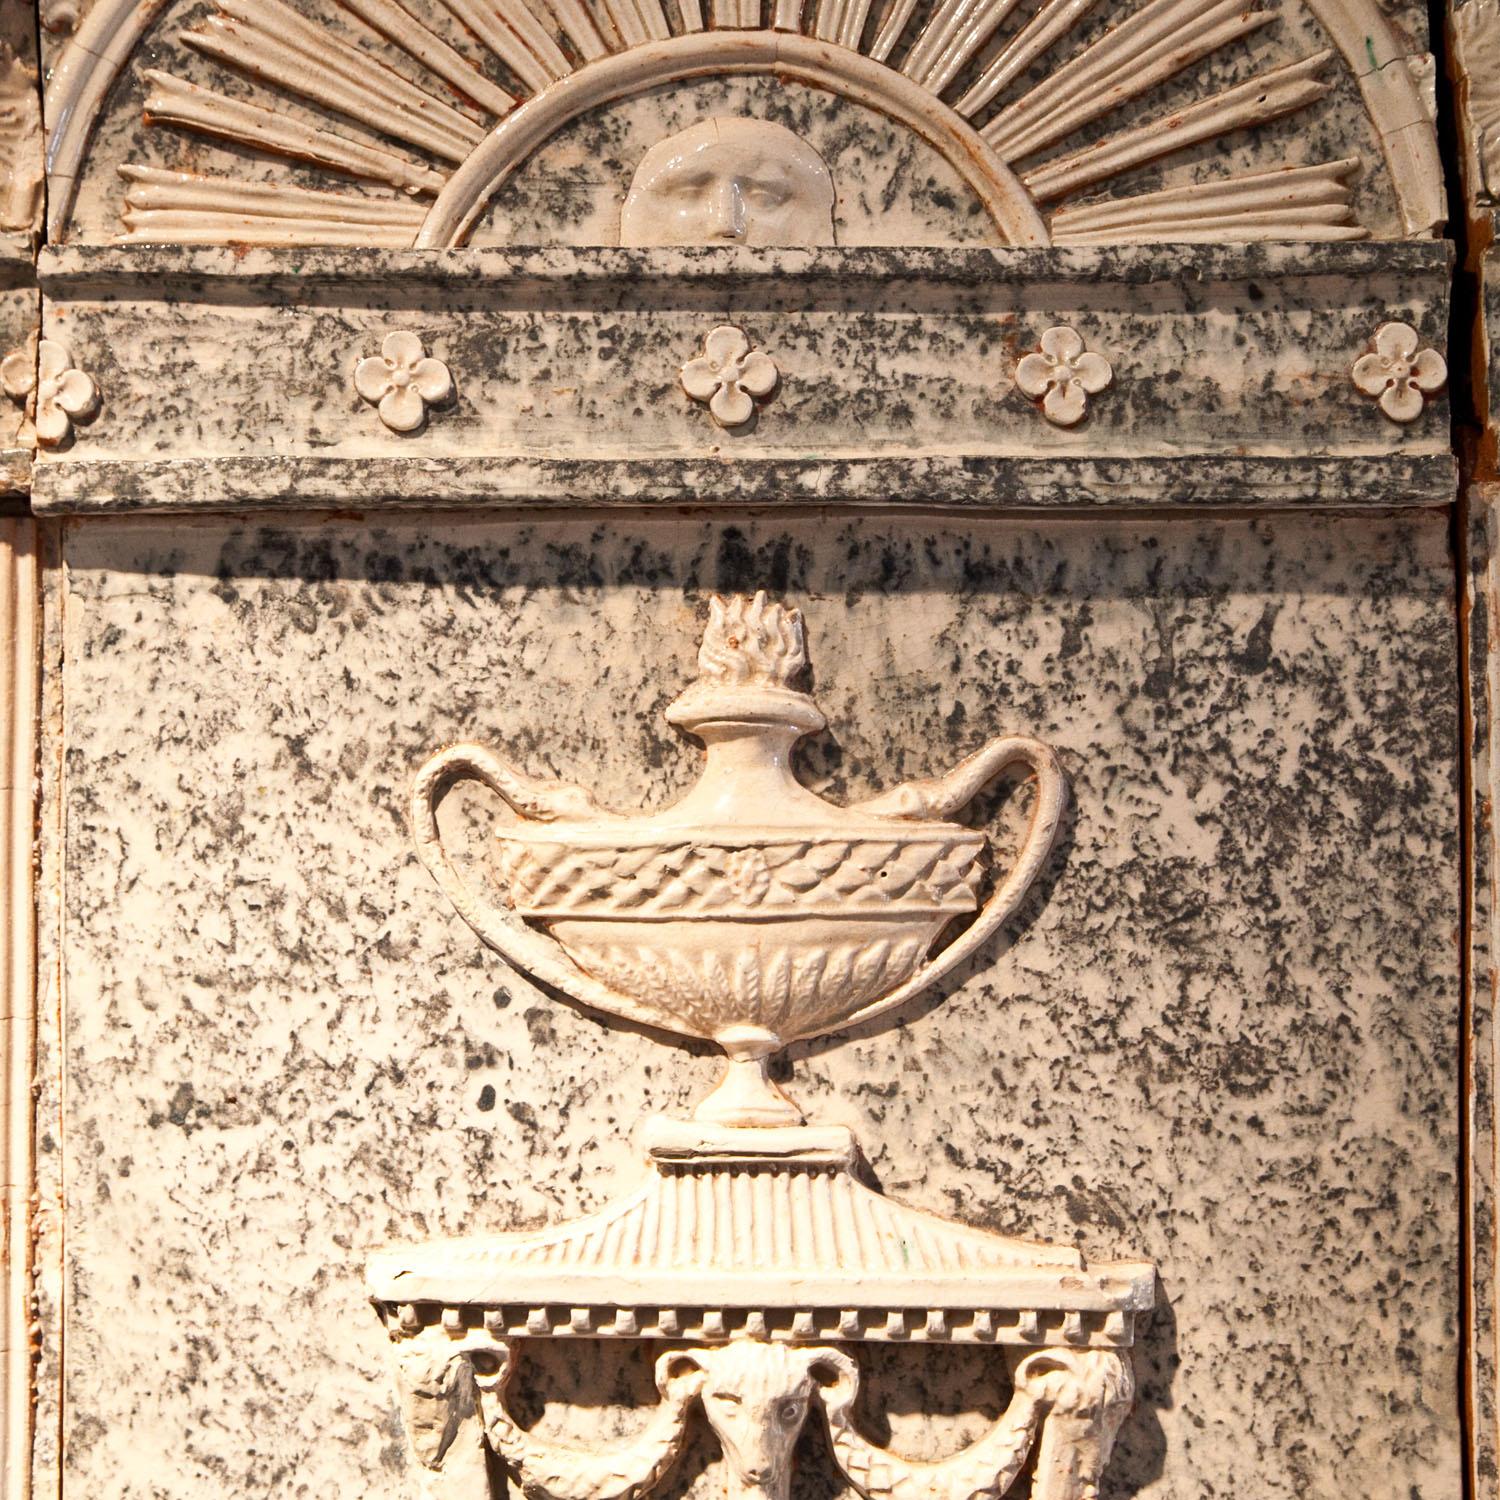 Austrian Neoclassical Tiled Stove, Prob. Austria, 1st Third of the 19th Century